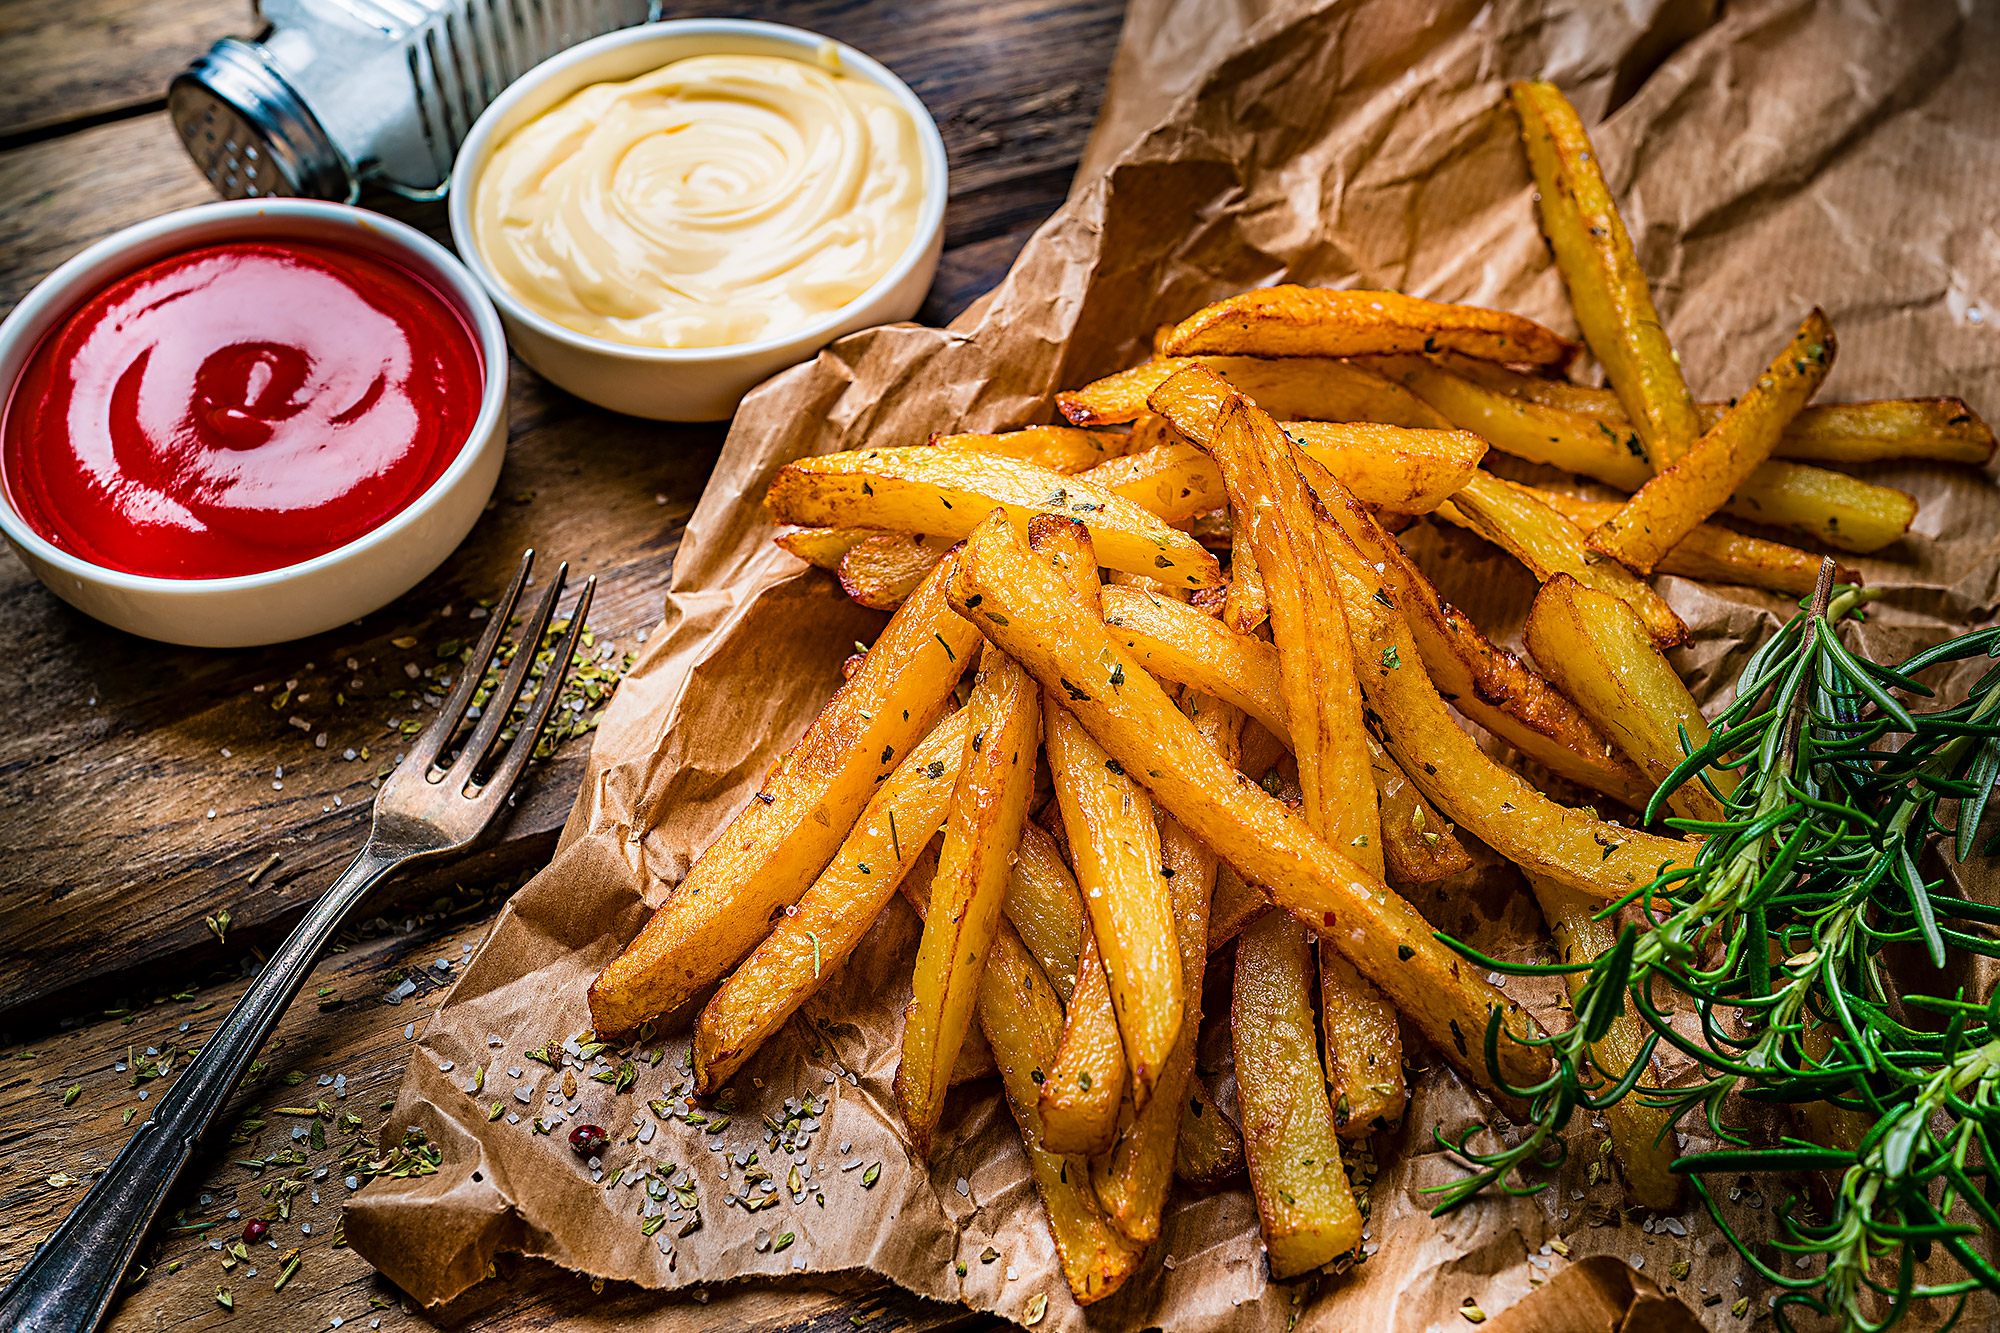 French fries easy to make yourself – crispy and delicious